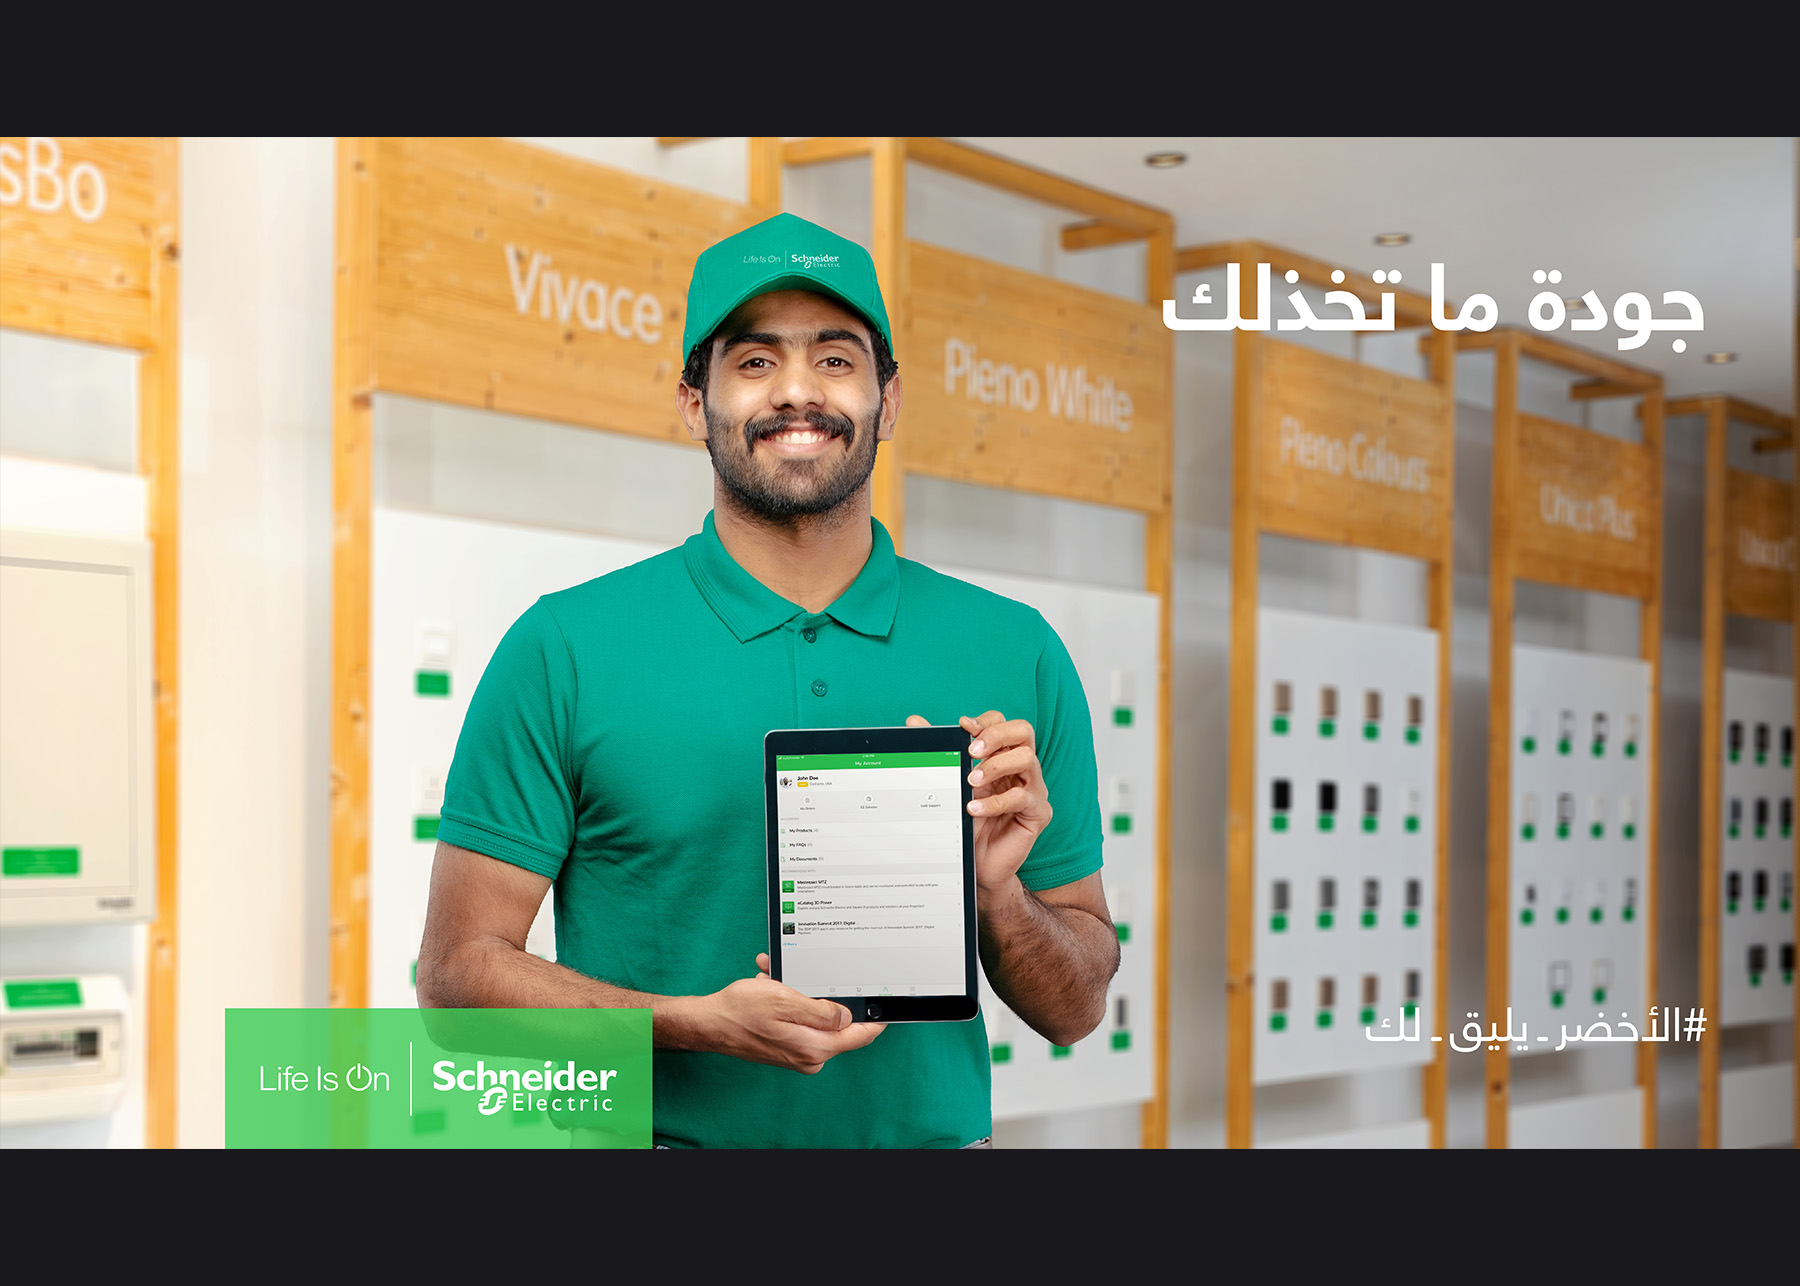 Social media campaign post for Schneider Electric